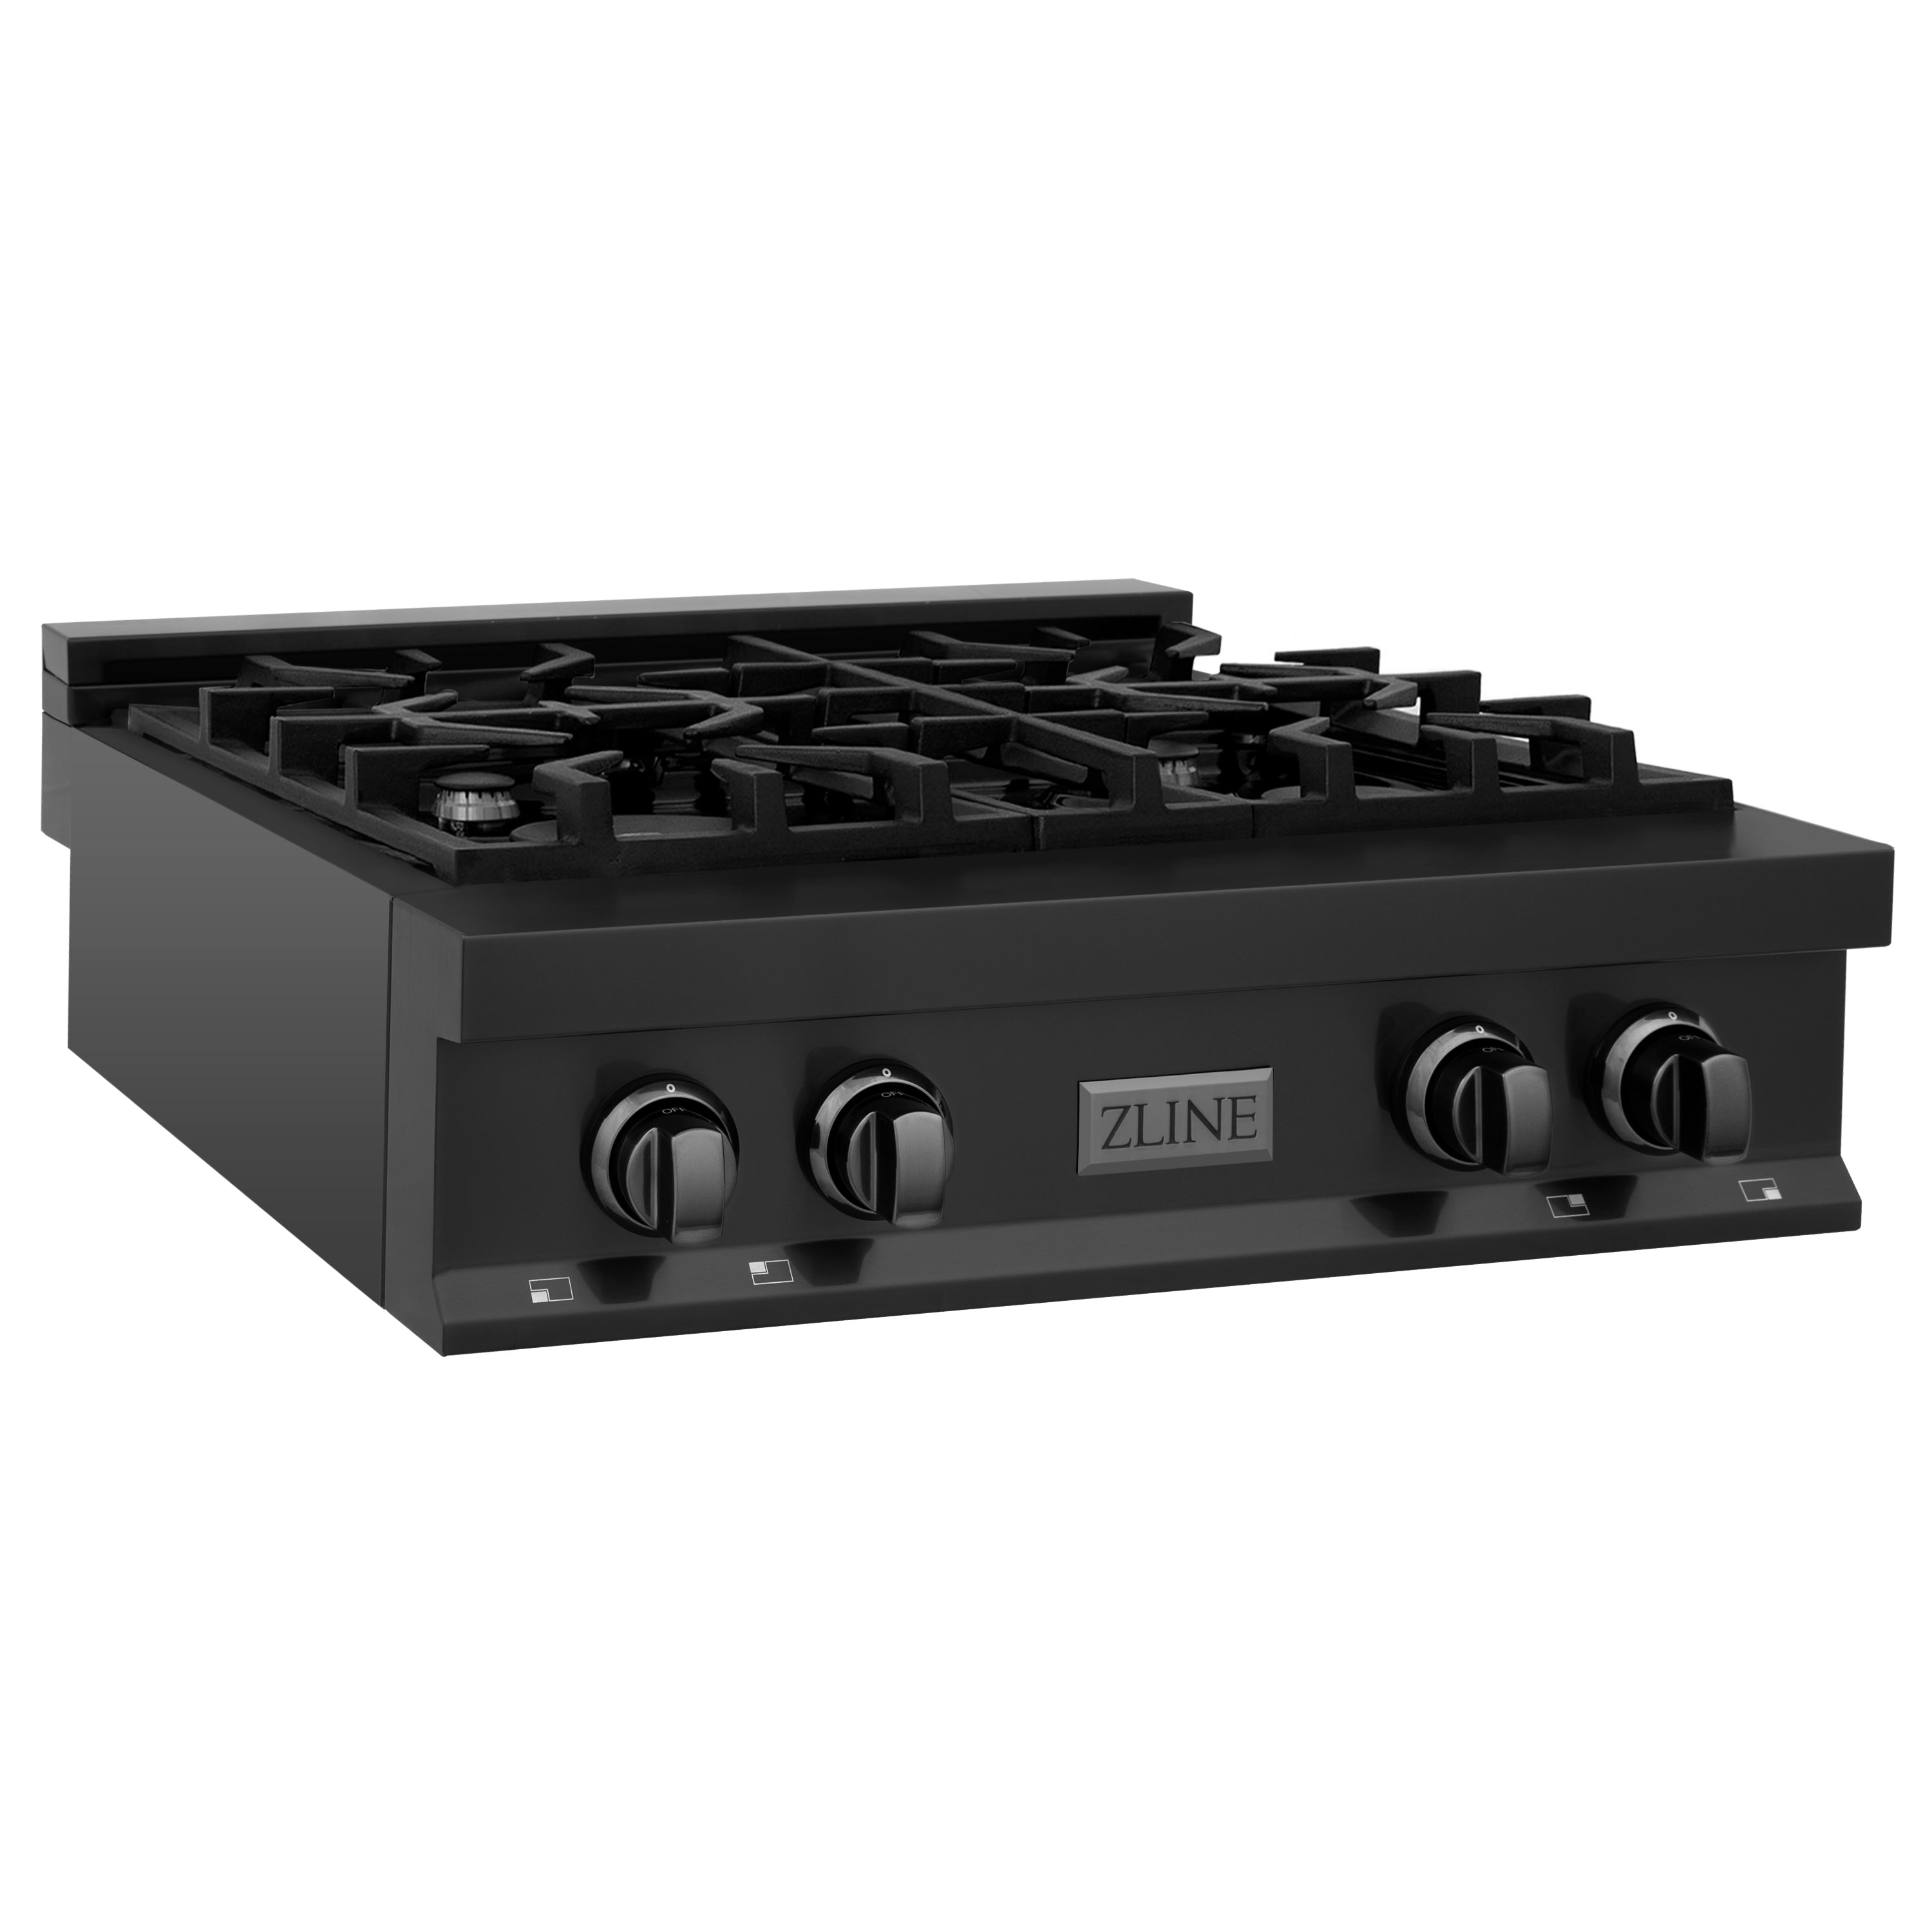 ZLINE 30" Porcelain Gas Stovetop in Black Stainless with 4 Gas Burners (RTB-30)